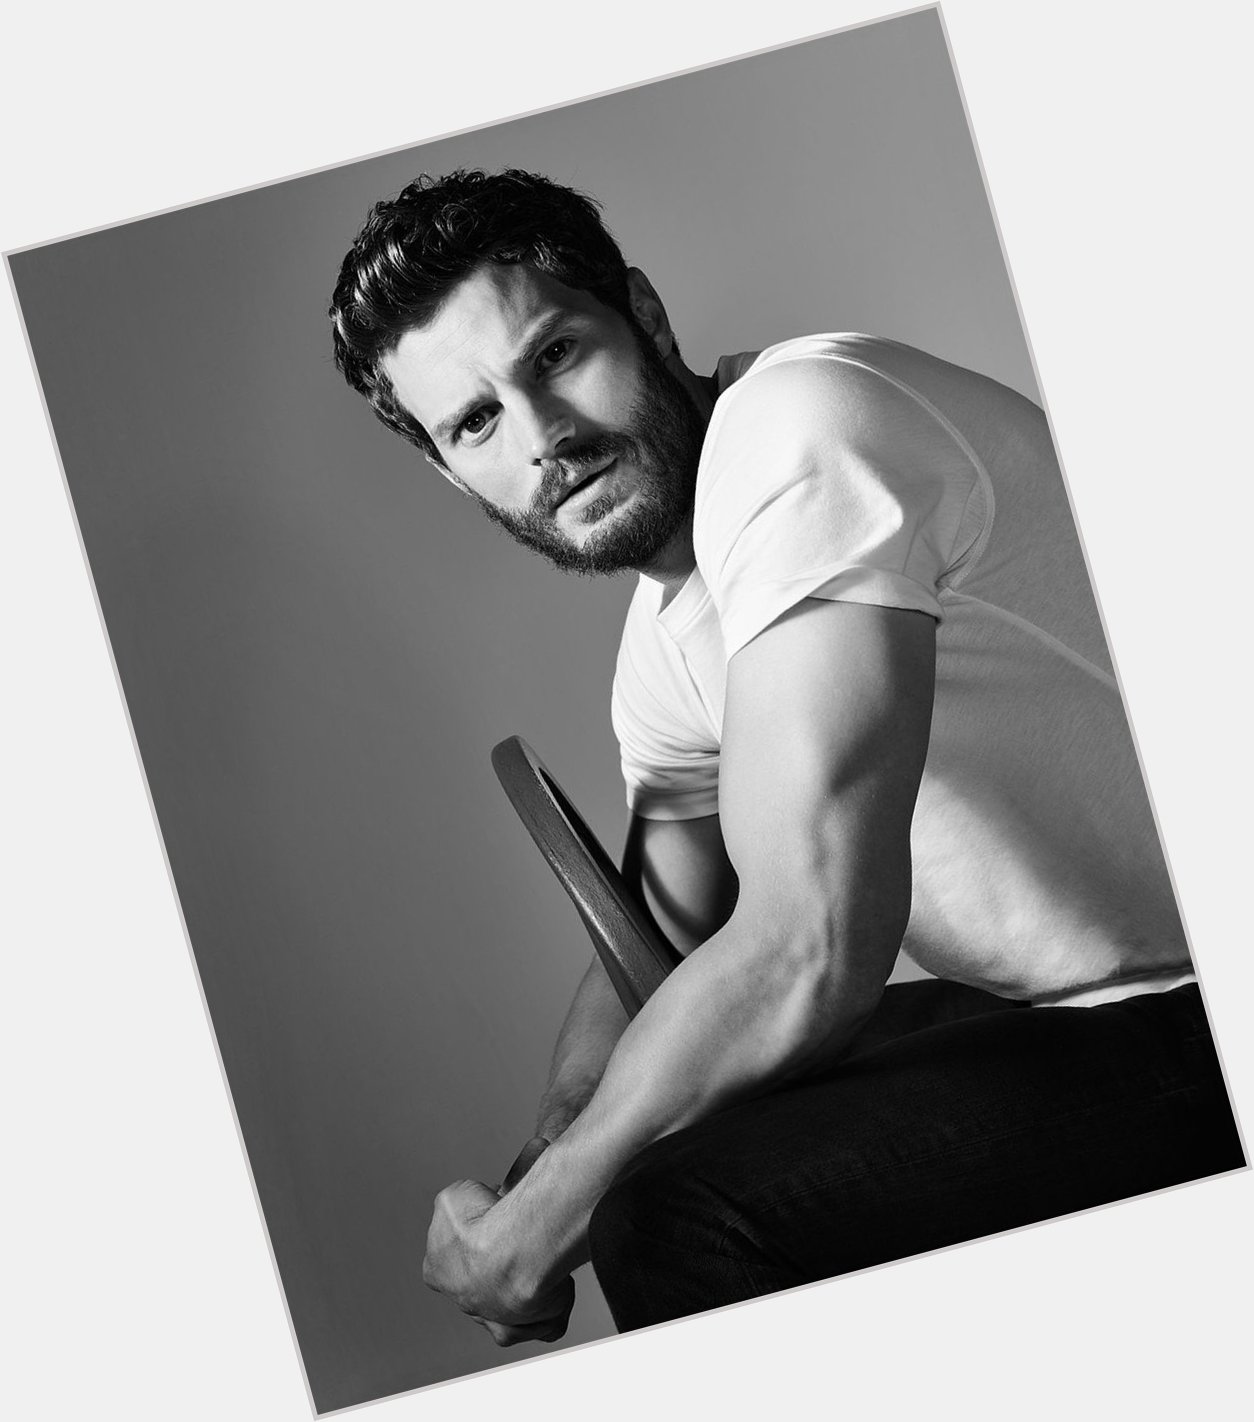 \"Everyone likes a bit of competition.\"
Happy 36th birthday to the Mr. Grey, Jamie Dornan 